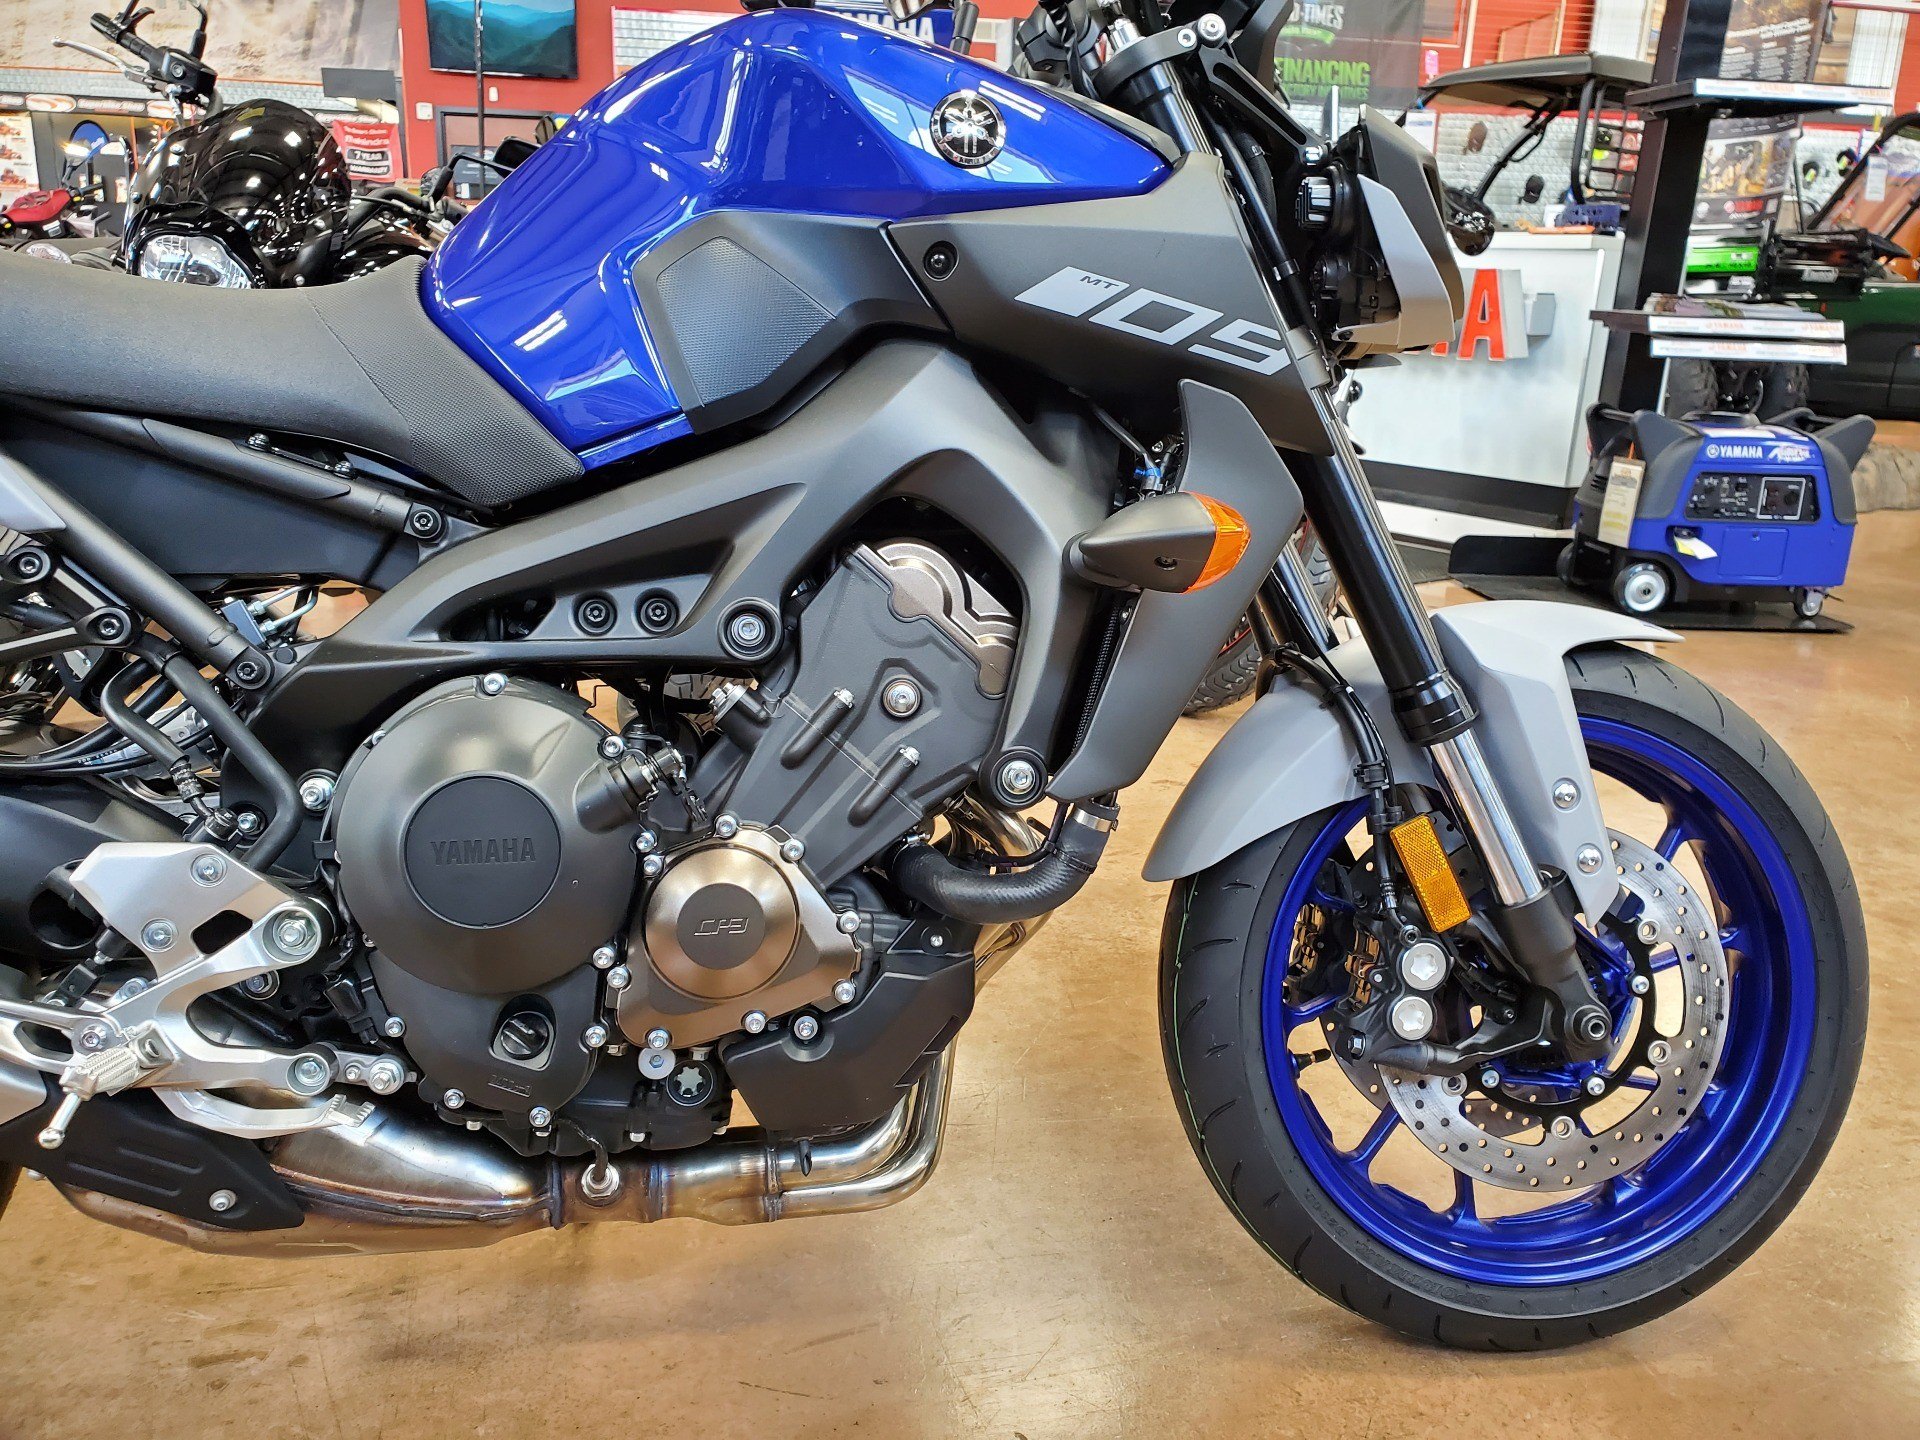 2020 Yamaha MT-09 Guide • Total Motorcycle